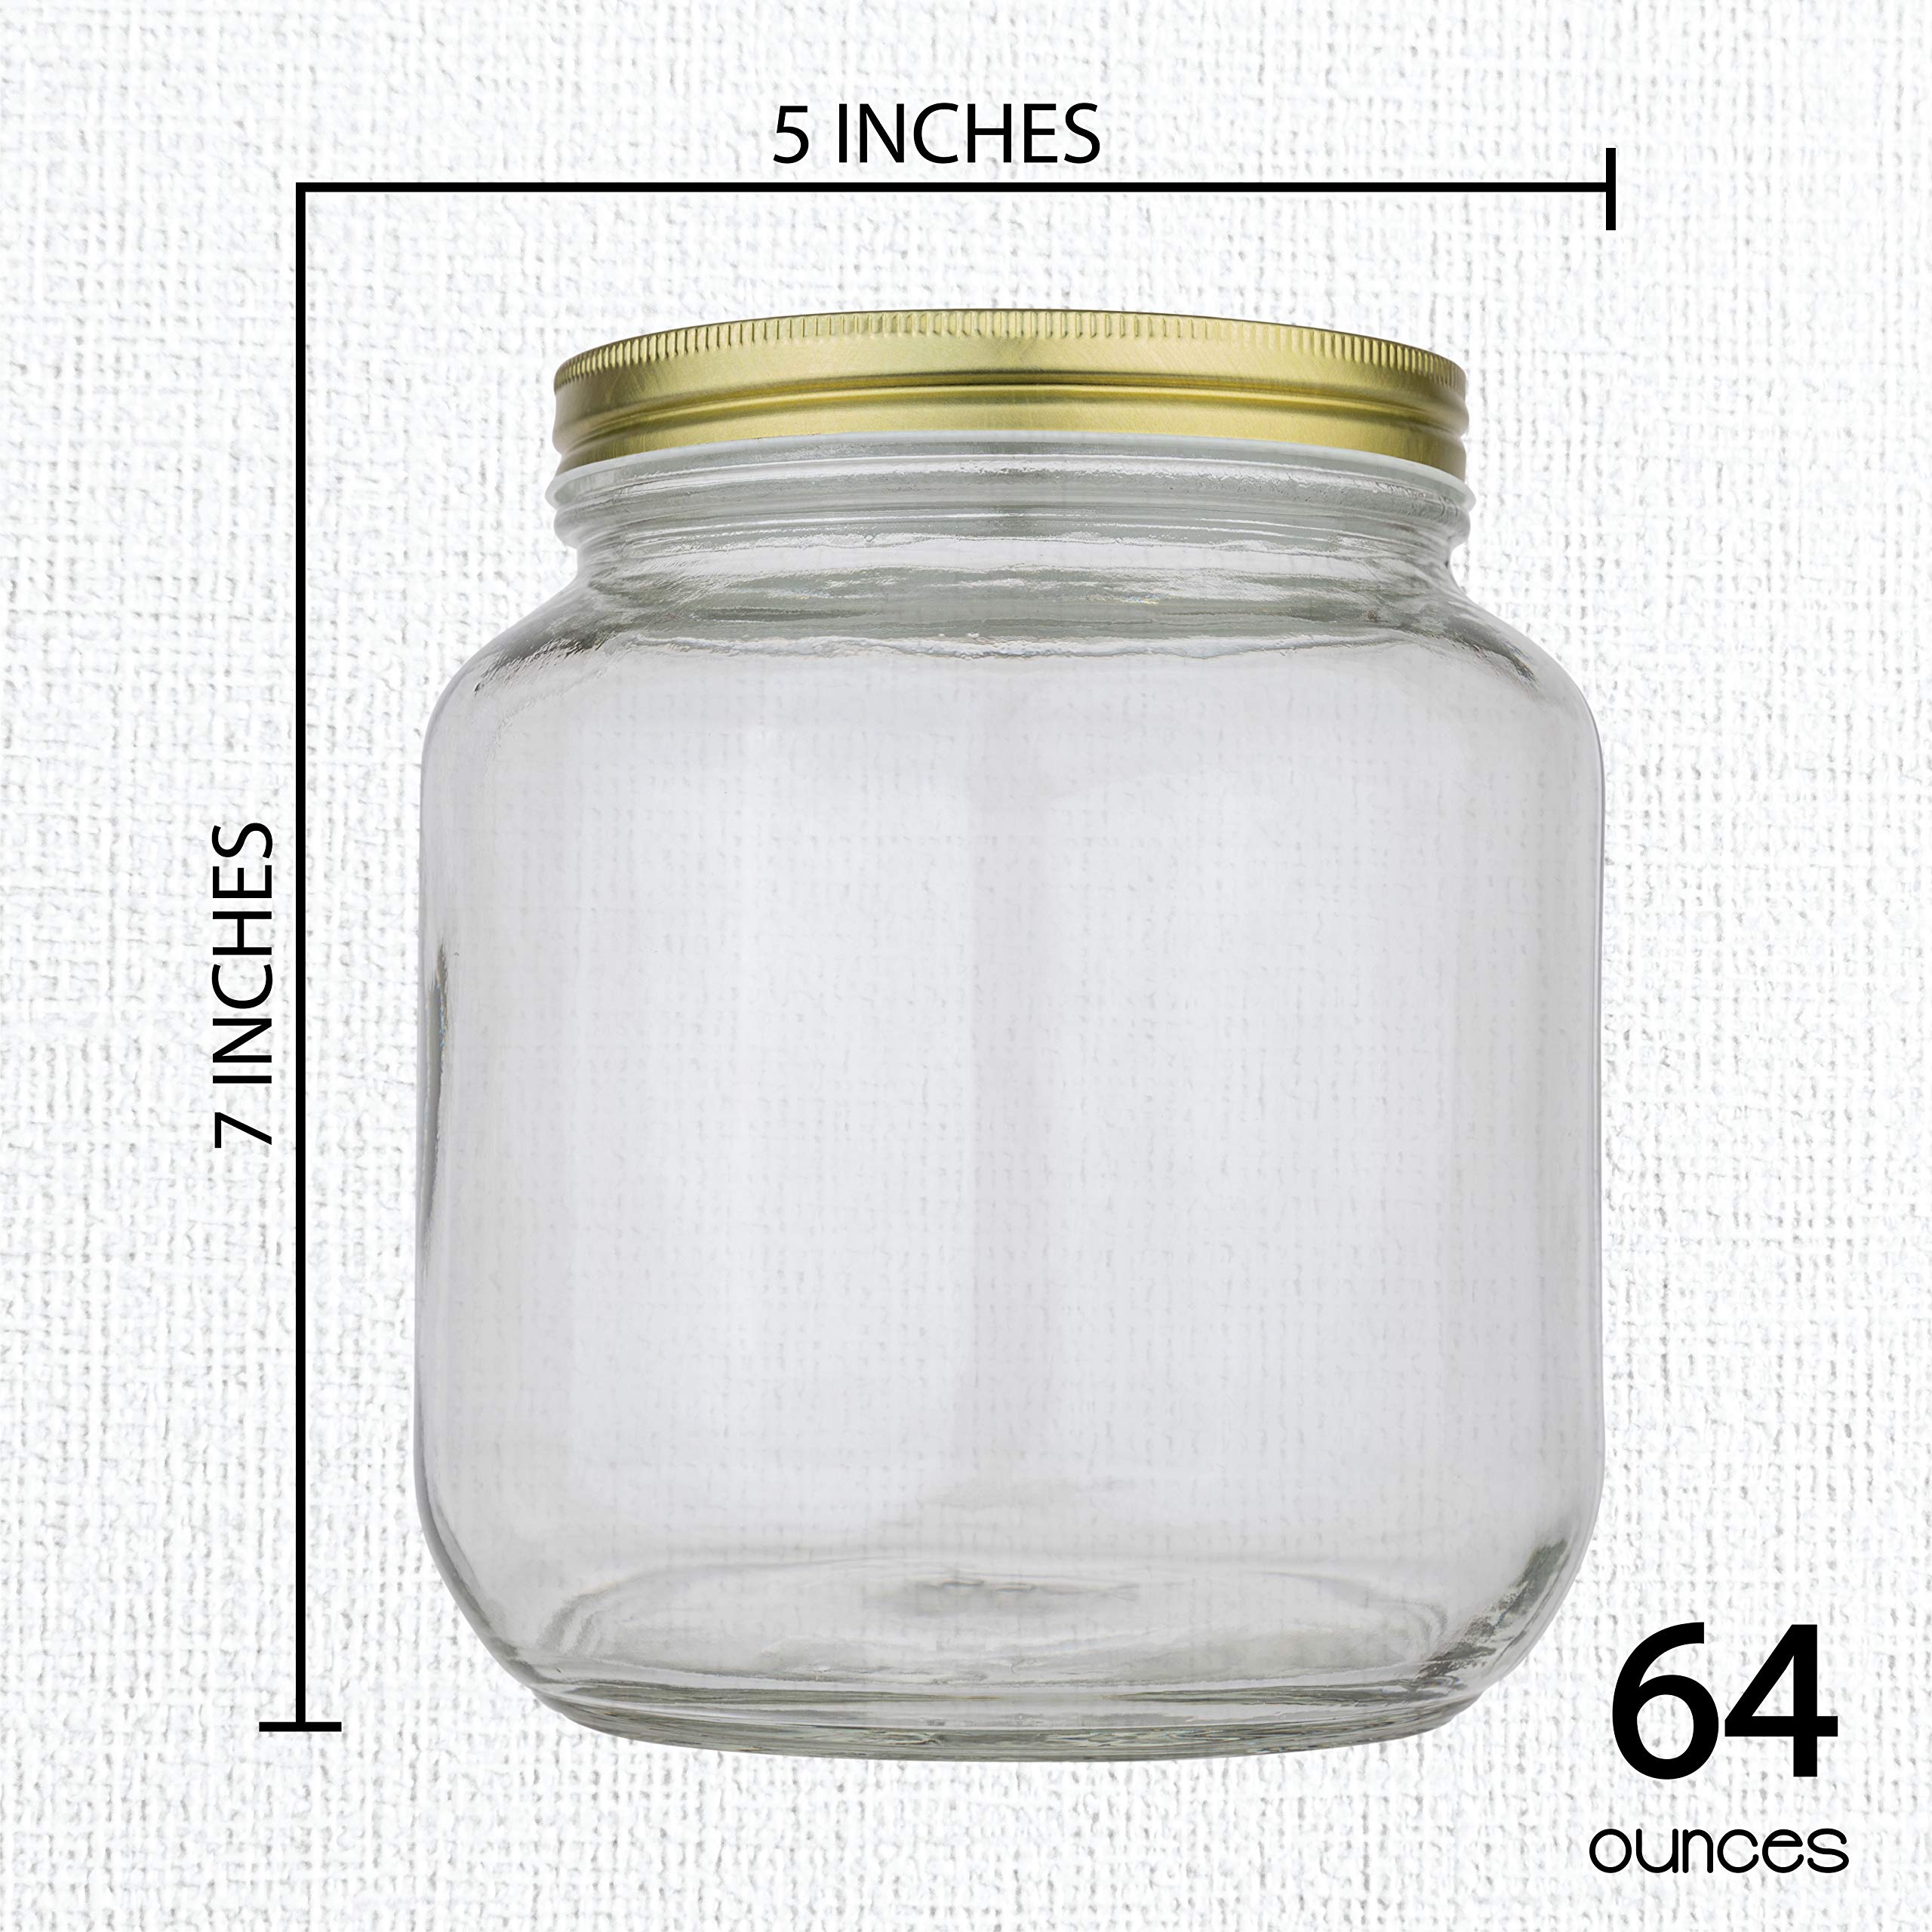 kitchentoolz Half Gallon Mason Jar Wide Mouth with Airtight Metal Lid - Safe for Fermenting Kombucha Kefir - Curing Pickling, Storing and Canning - BPA-Free Dishwasher Safe  - Like New